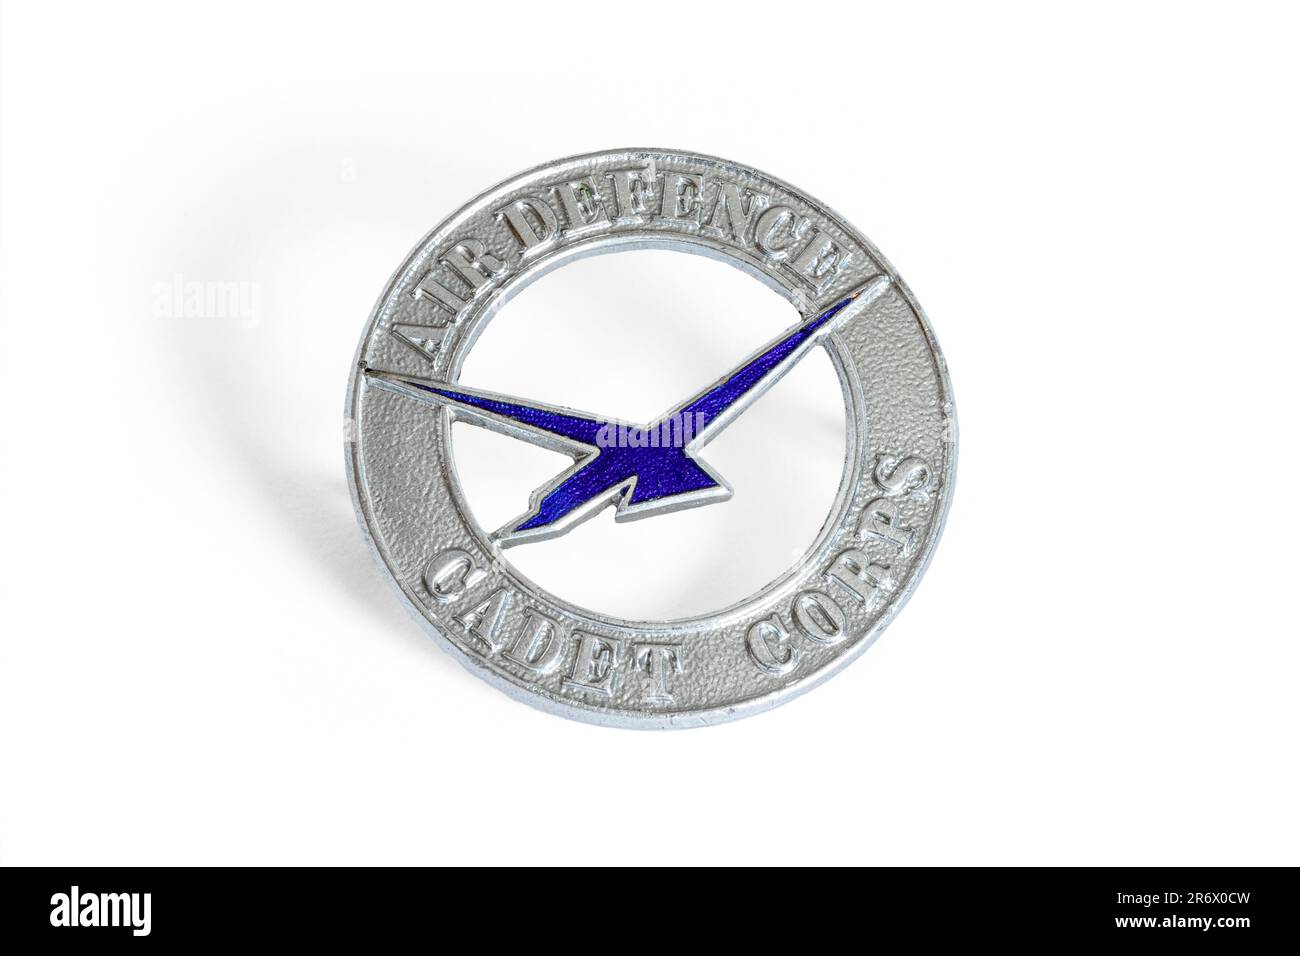 World War 2 Air Defence Cadet Corps Royal Air Force RAF Cap Badge, isolated on a white background, UK Stock Photo